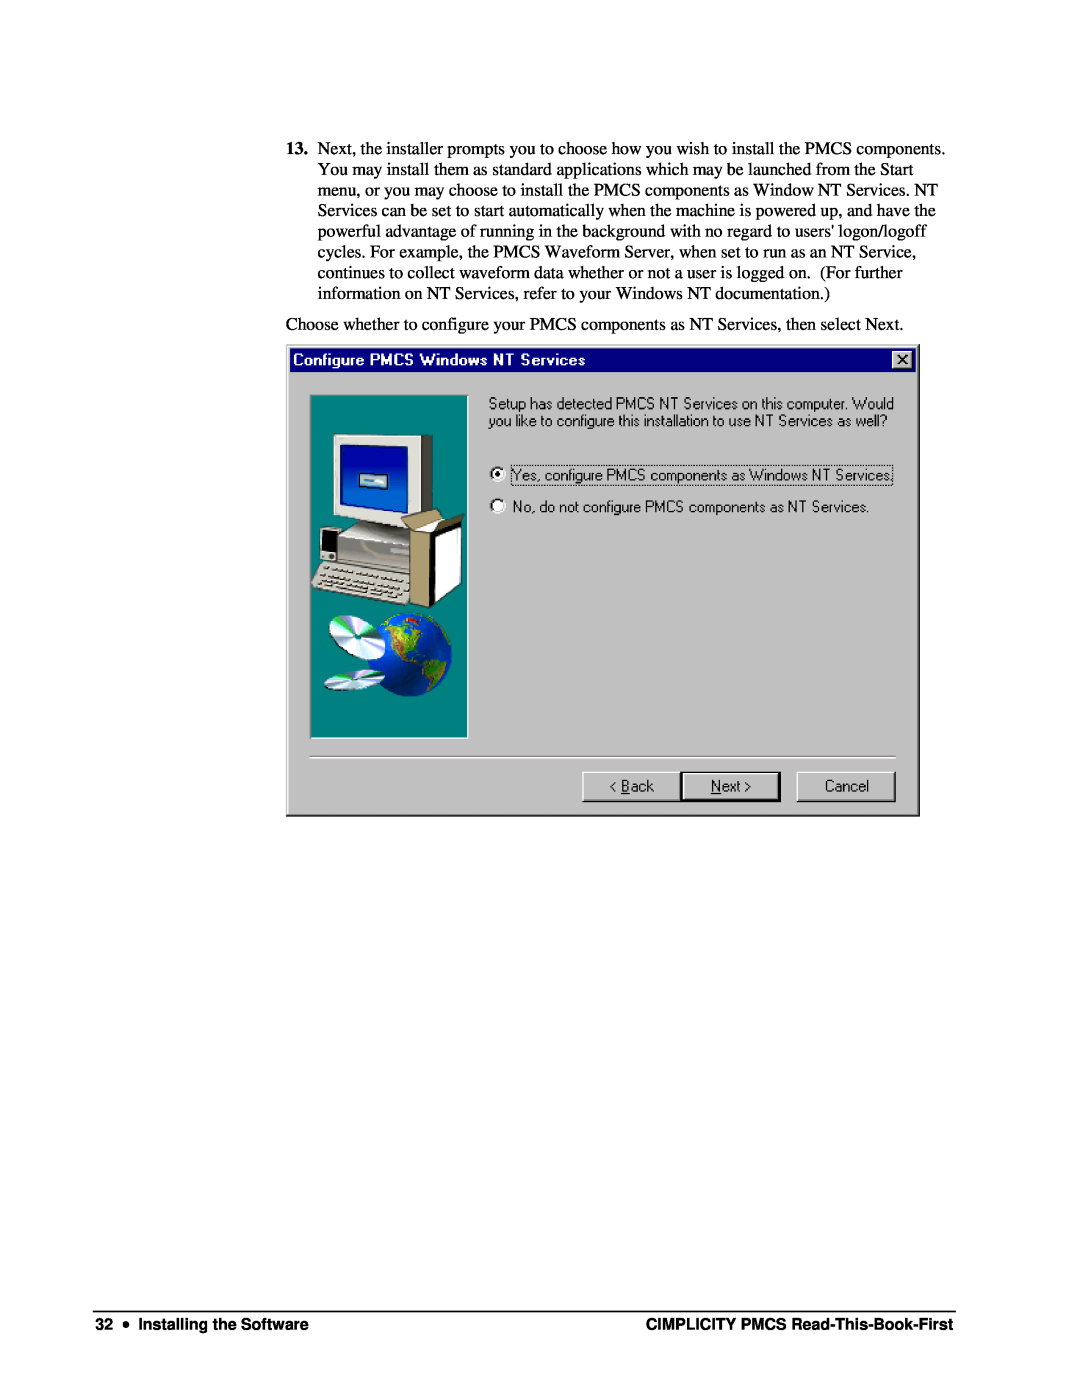 GE DEH-211 manual Installing the Software, CIMPLICITY PMCS Read-This-Book-First 